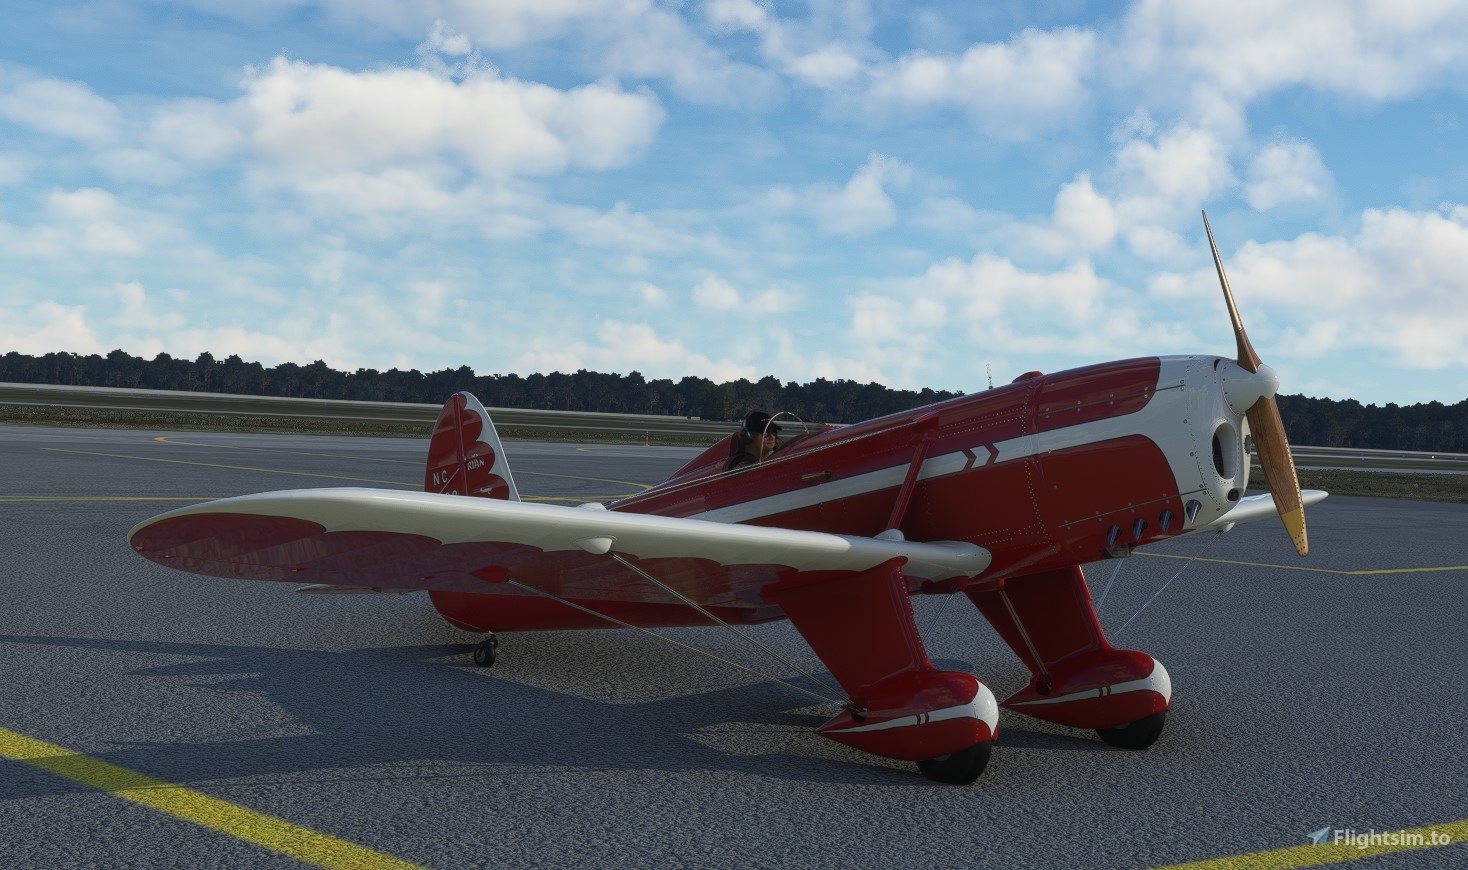 https://cdn.flightsim.to/images/24/a1r-ryan-st-a-special-nc17368---repainted-for-western-antique-aeroplane--automobile-museum-20419-1680314721-hIEfe.jpg?width=1400auto_optimize=medium